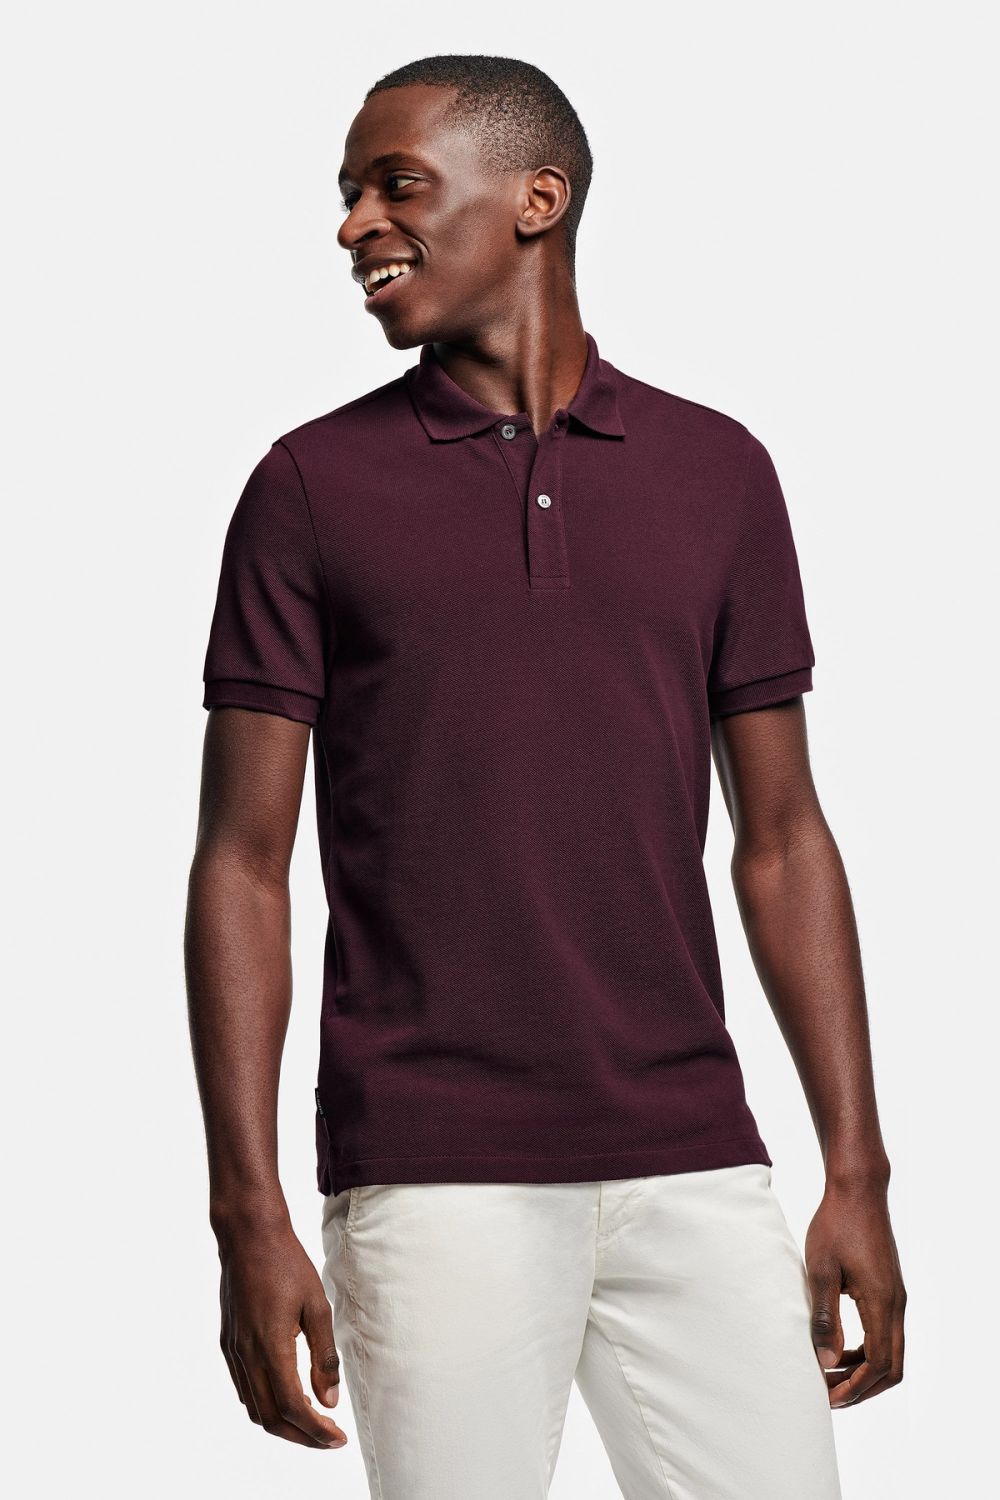 Reserves - The Classic Polo